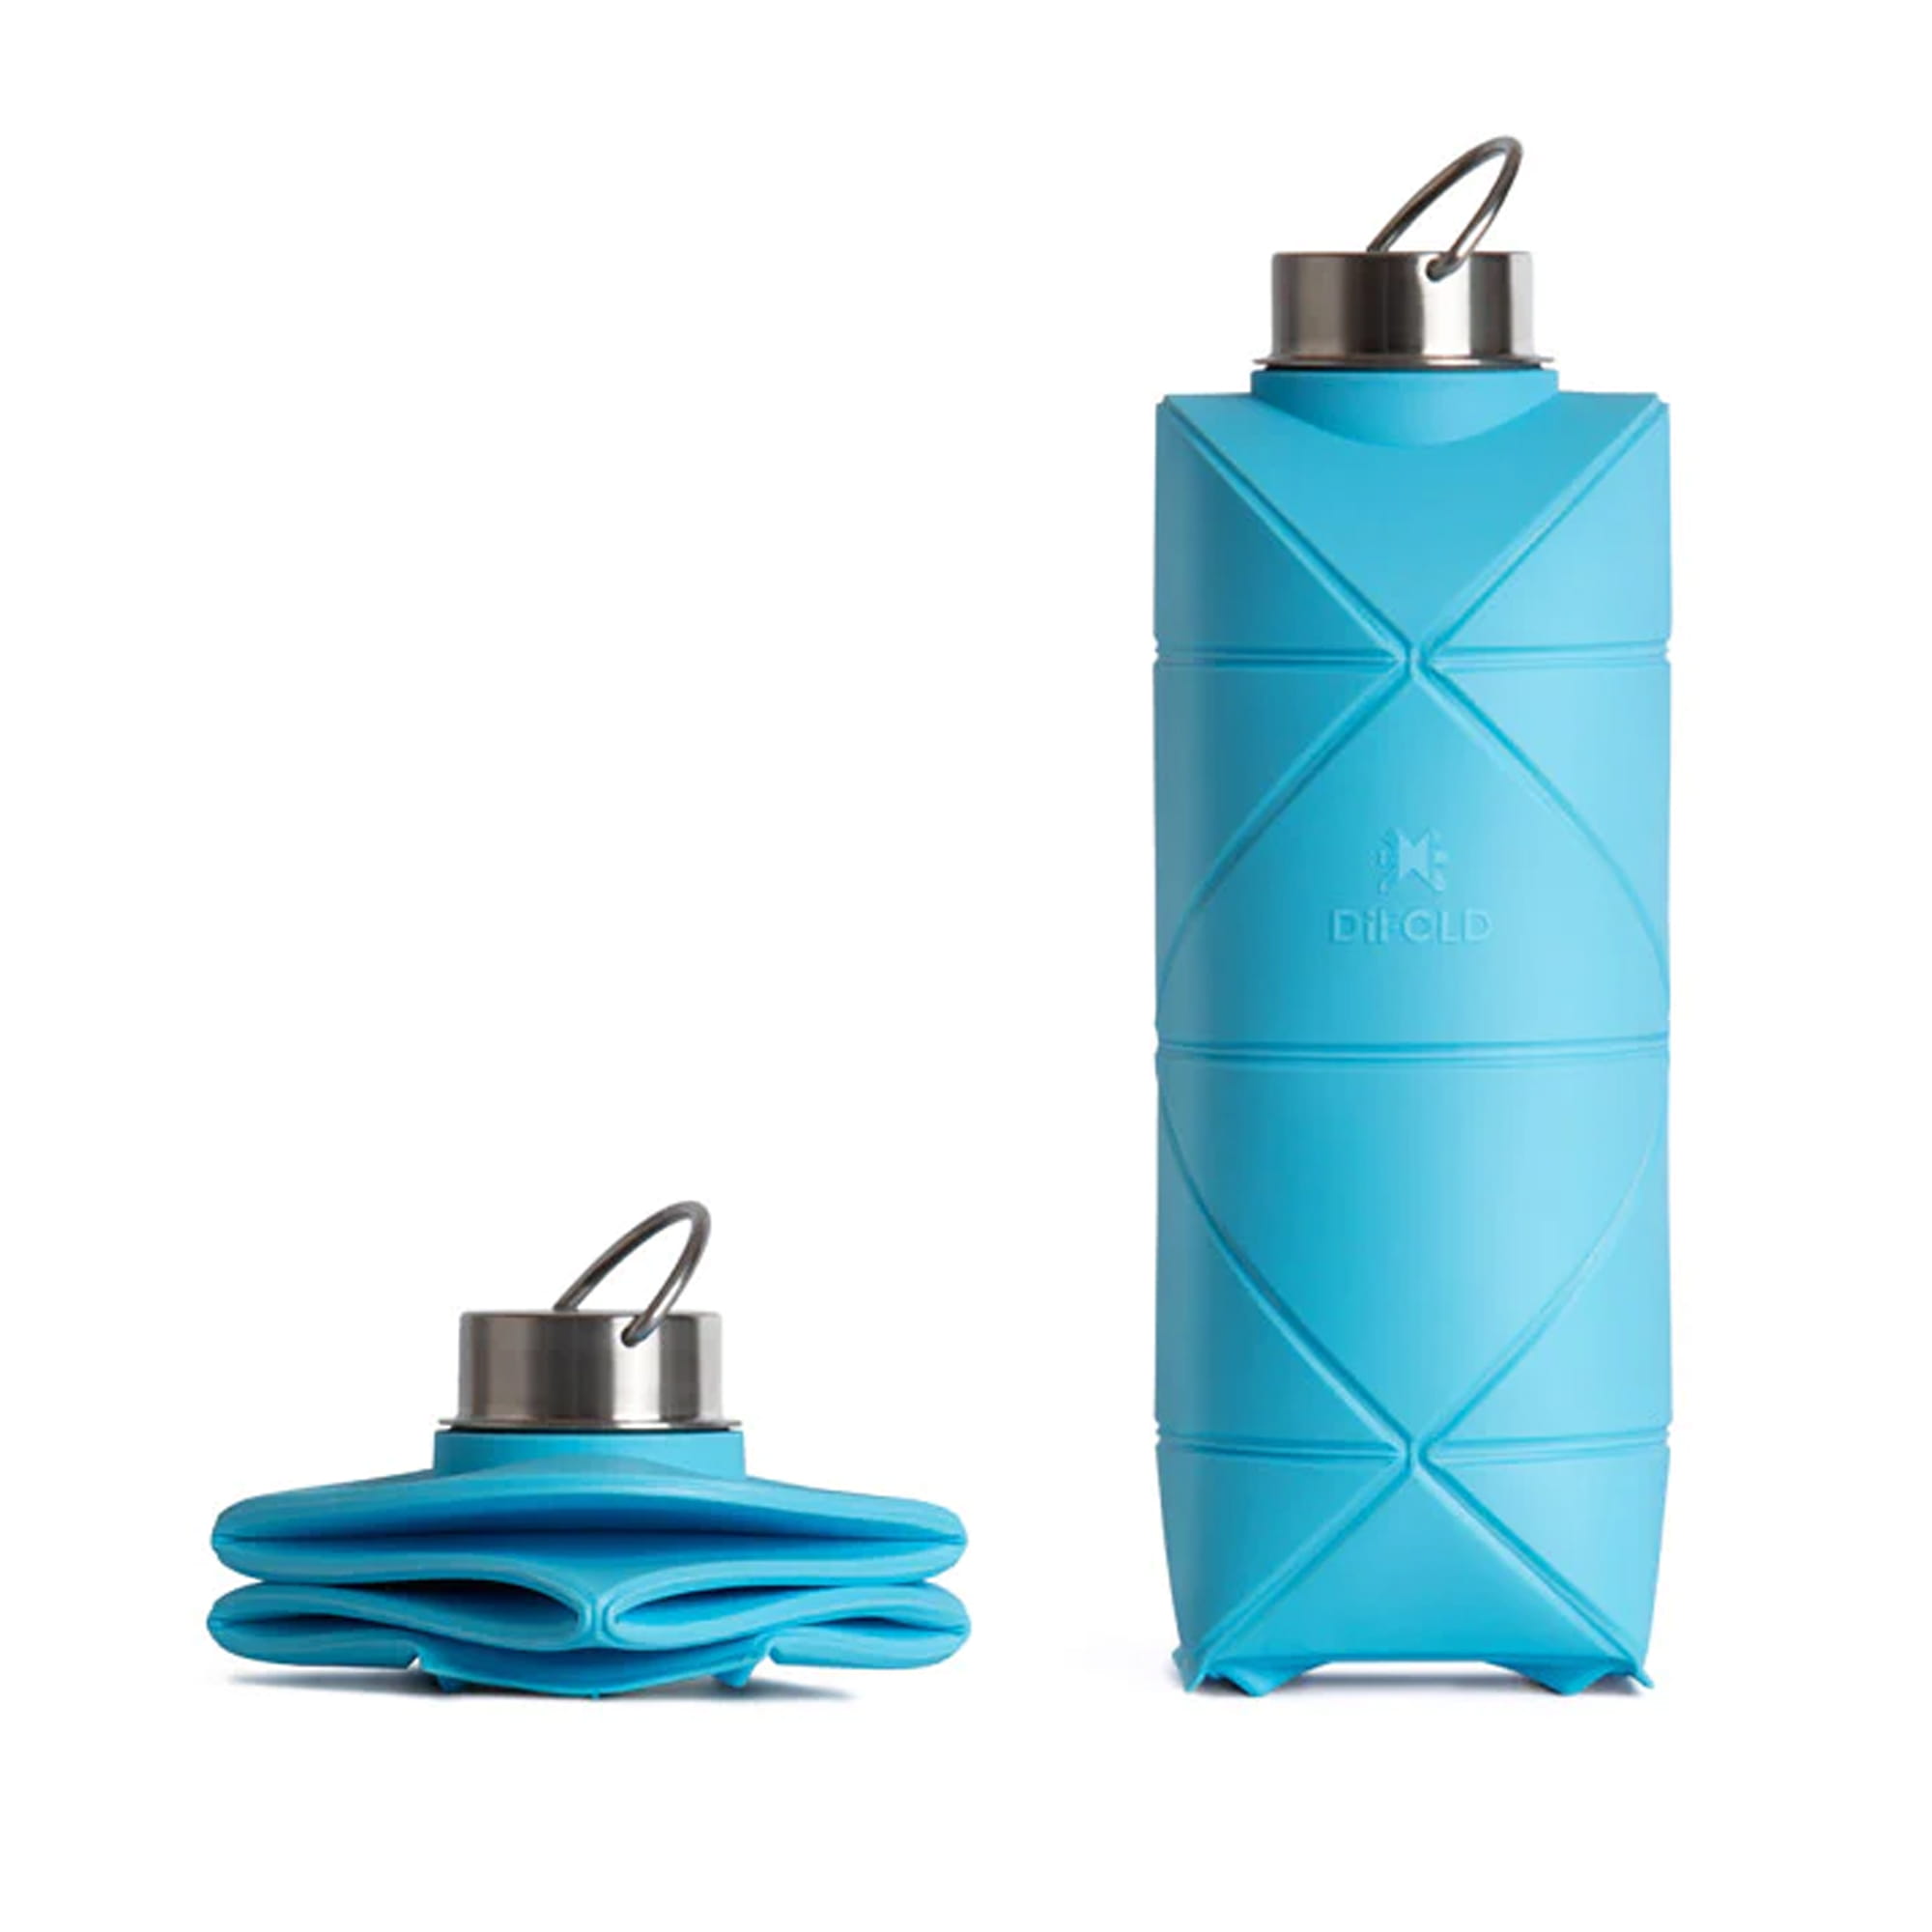 DiFOLD Origami Bottle - Faltbare Trinkflasche 750 ml - Sky Blue